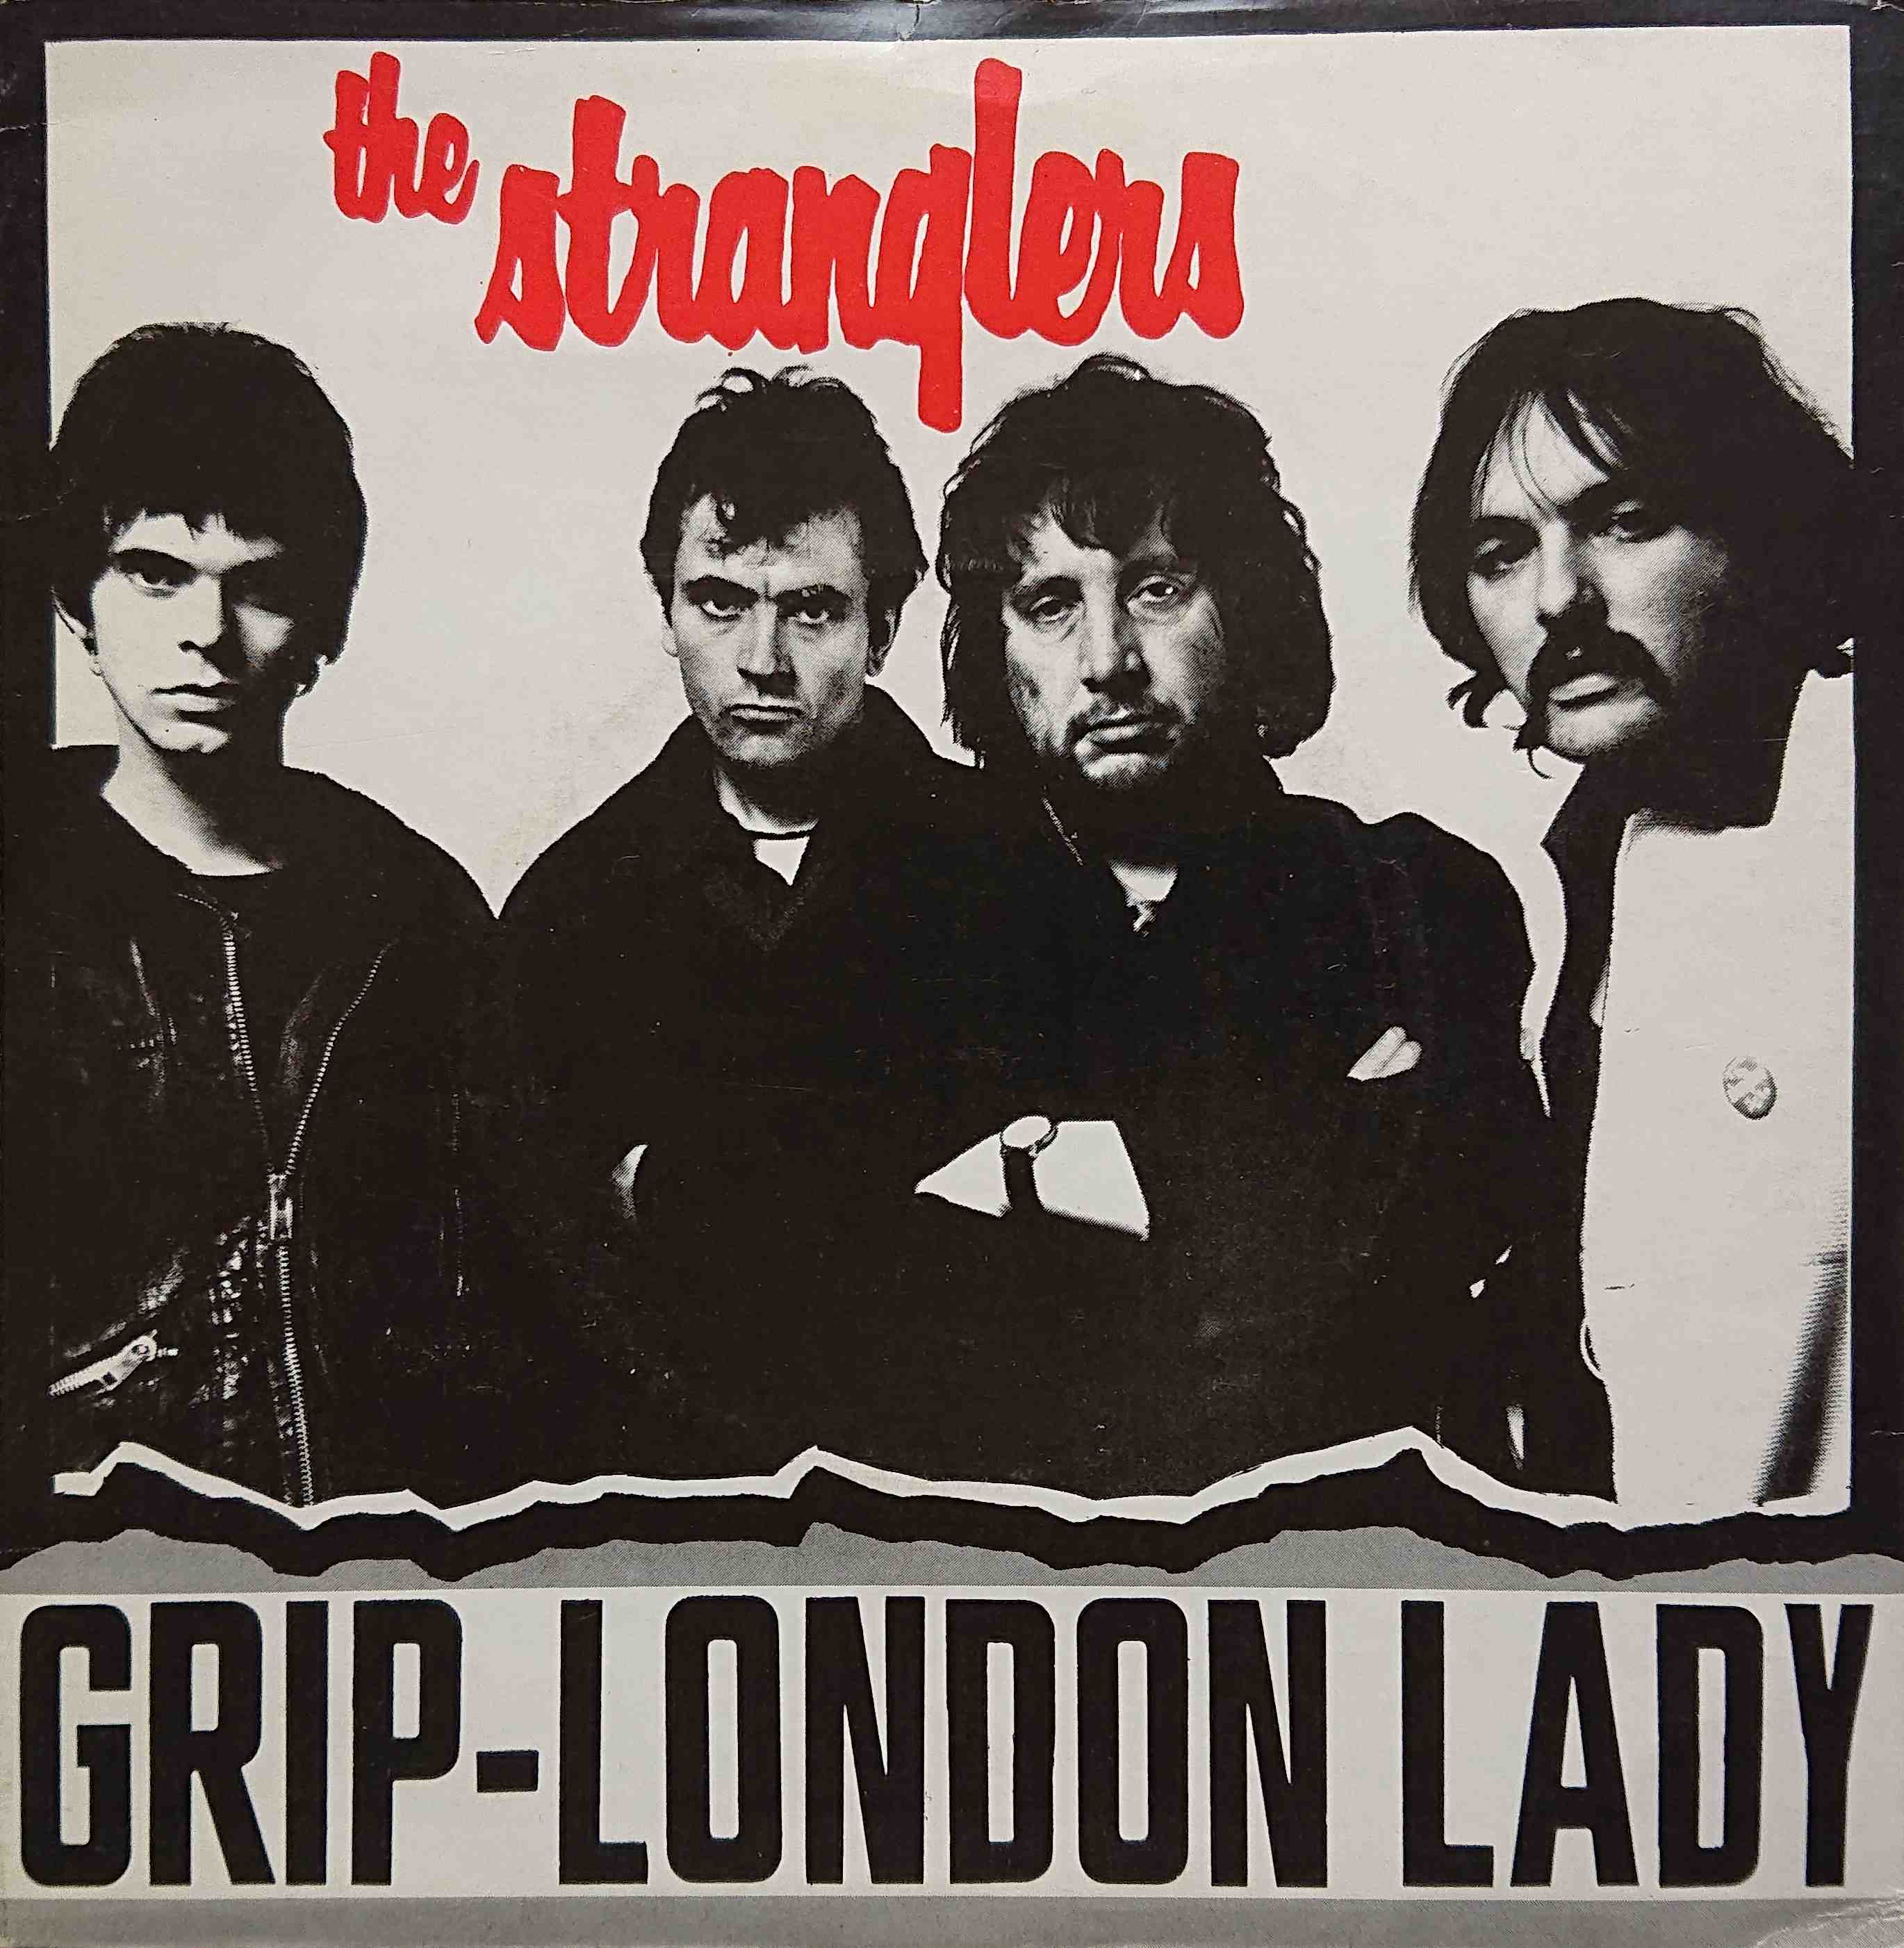 Picture of (Get a) Grip (On yourself) by artist The Stranglers from The Stranglers singles